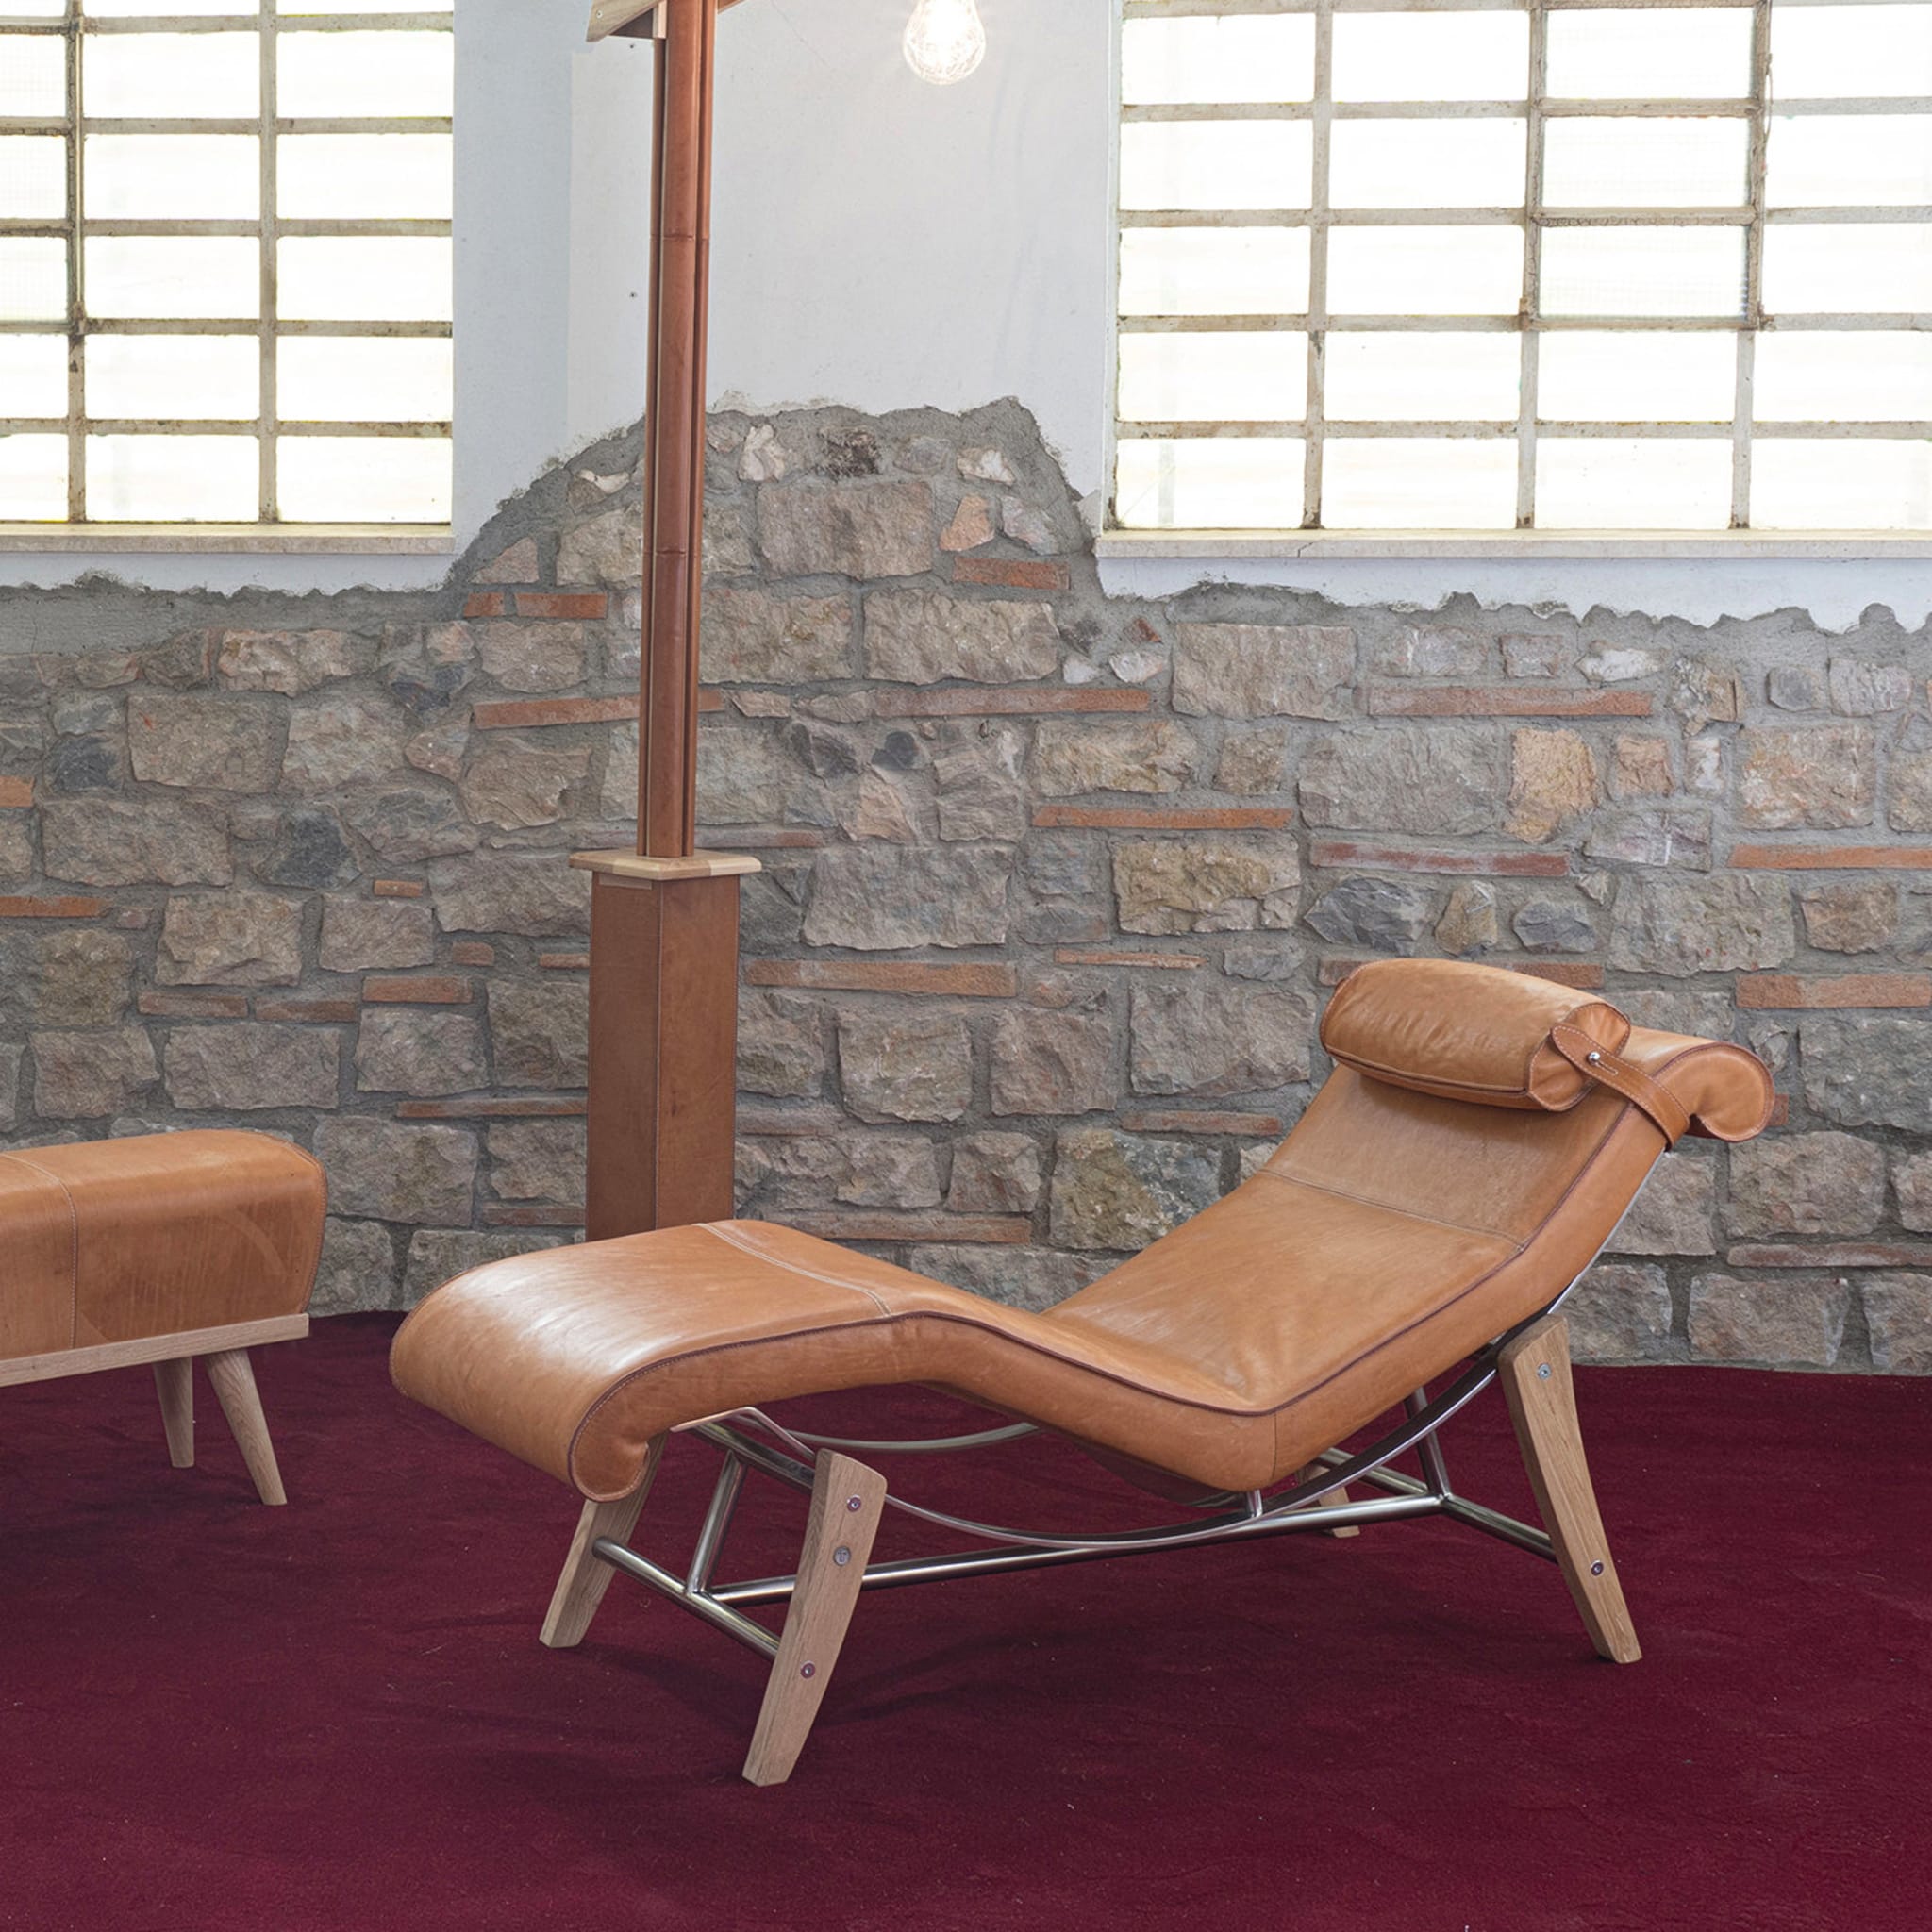 Leather Chaise Longue - Alternative view 2